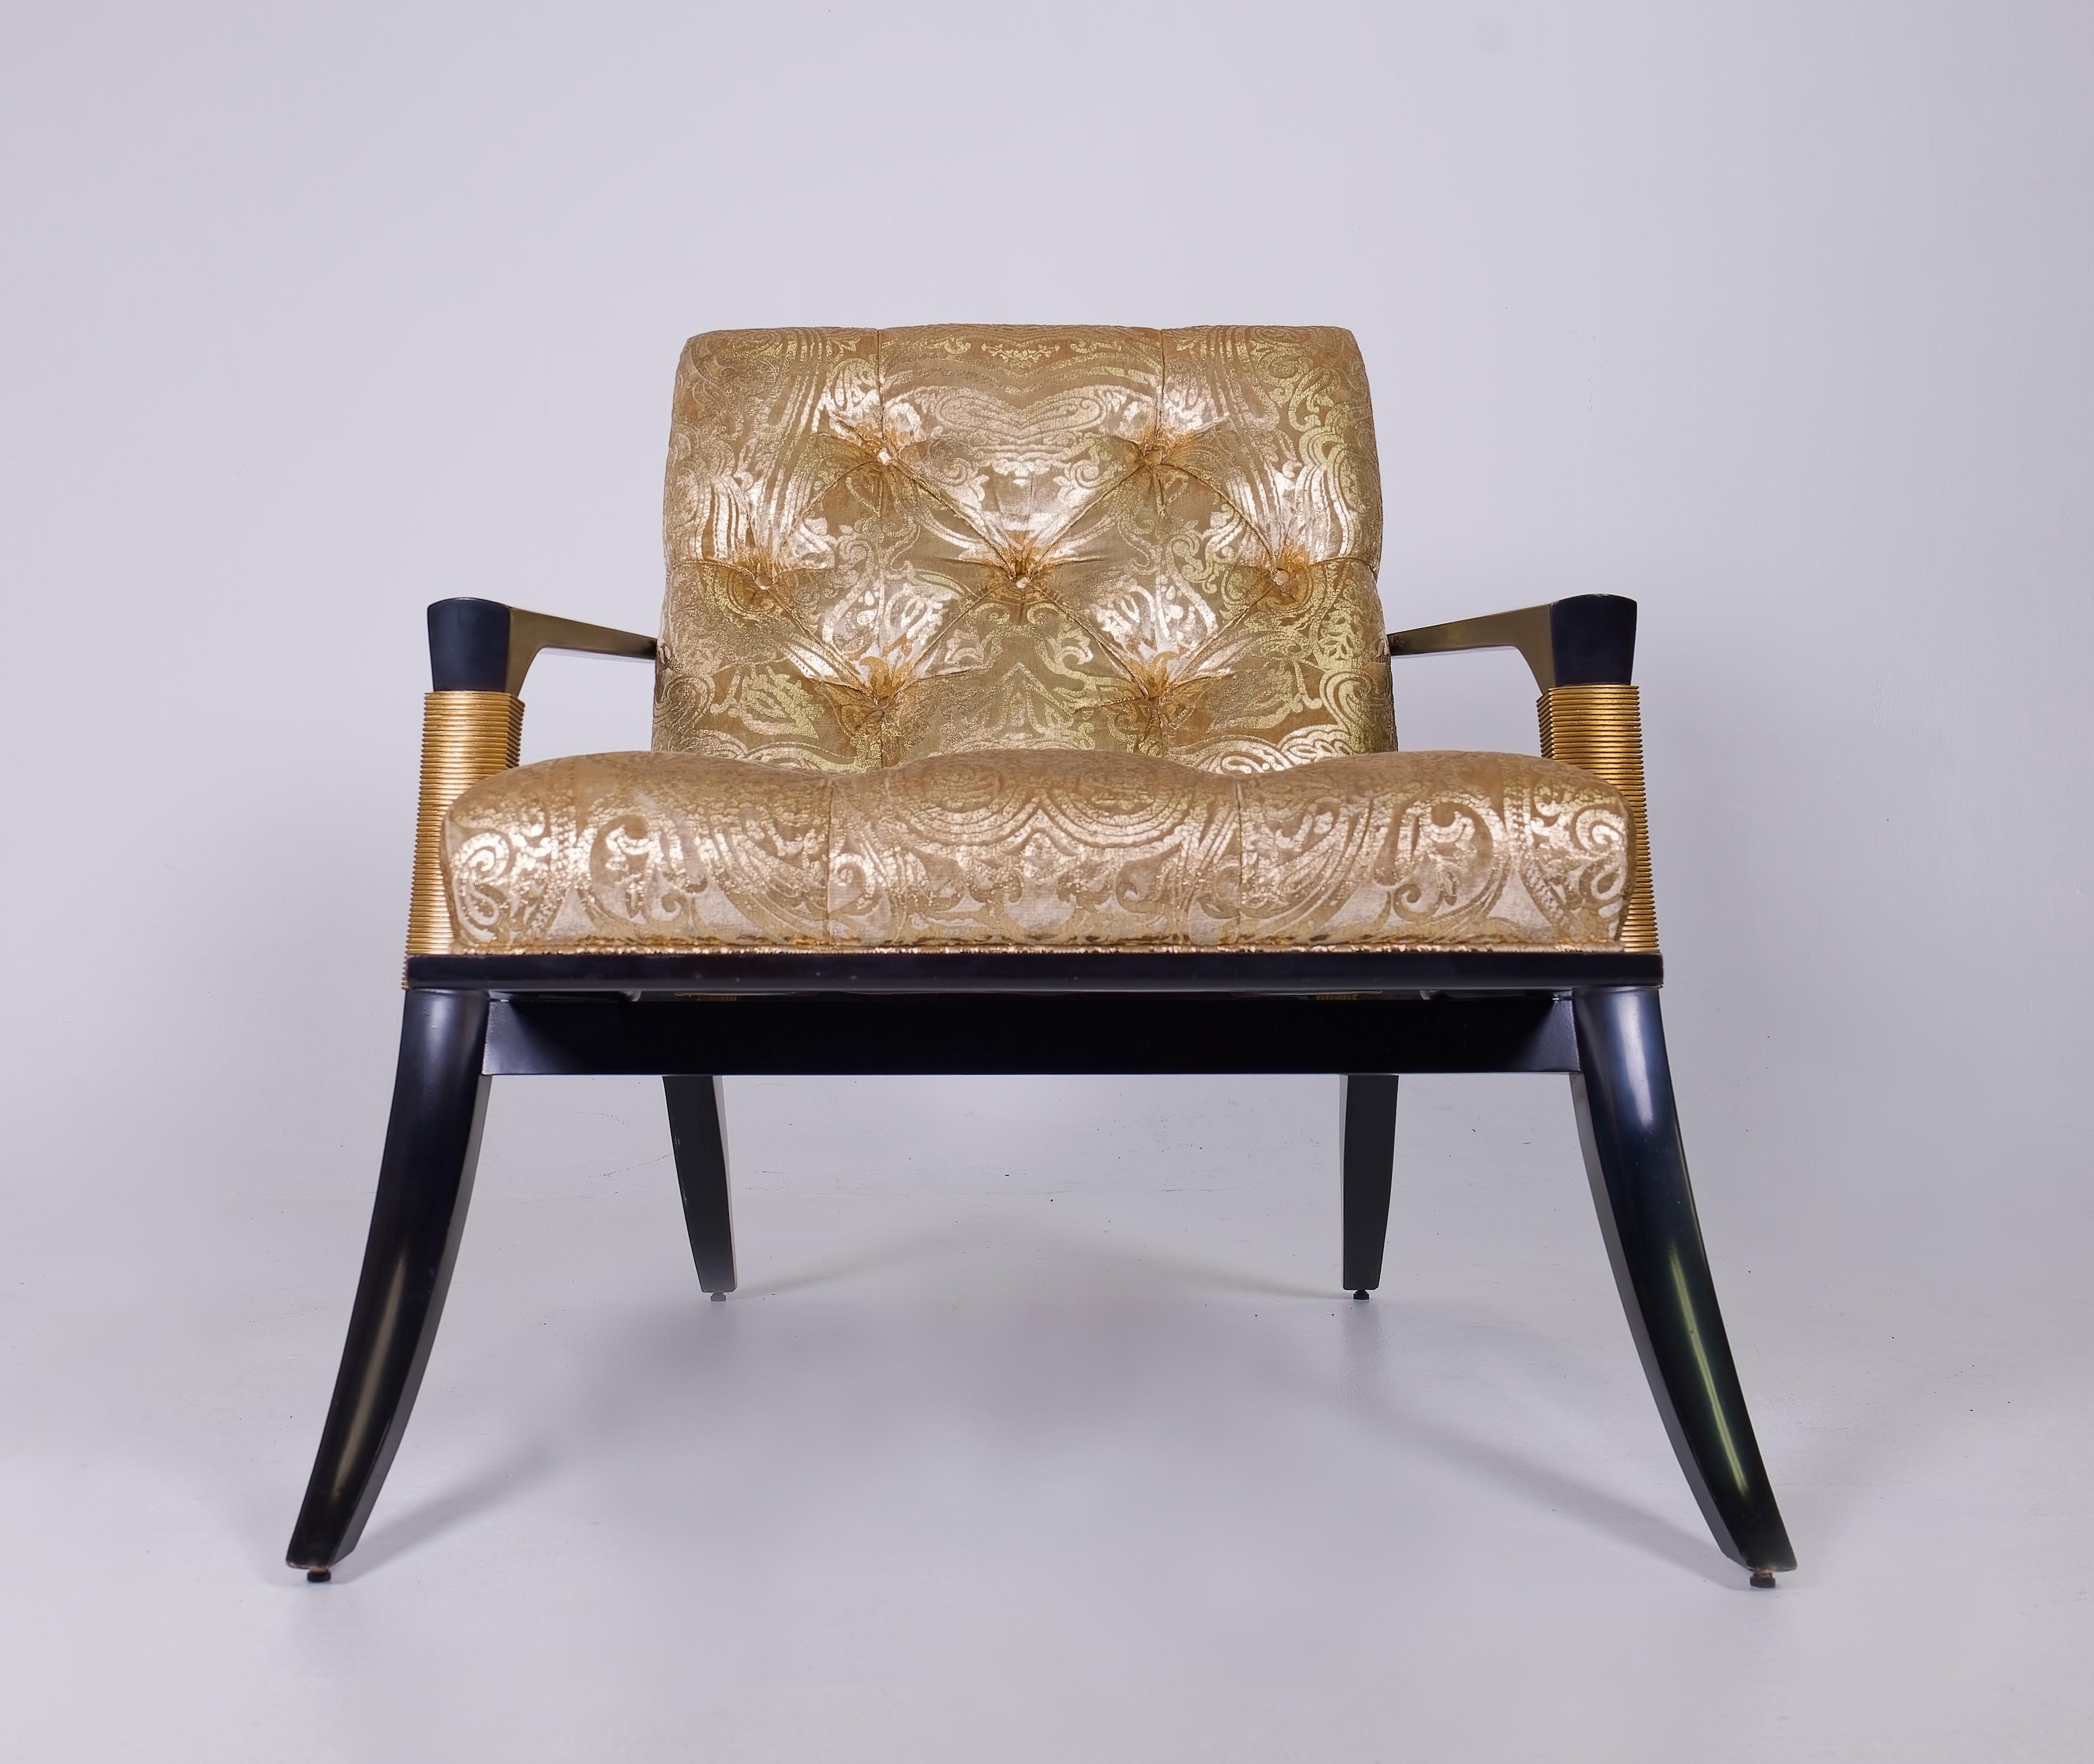 Pair of Athens Lounge Chairs by Thomas Pheasant for Baker, Klismos Gold Tufted In Good Condition For Sale In Miami, FL